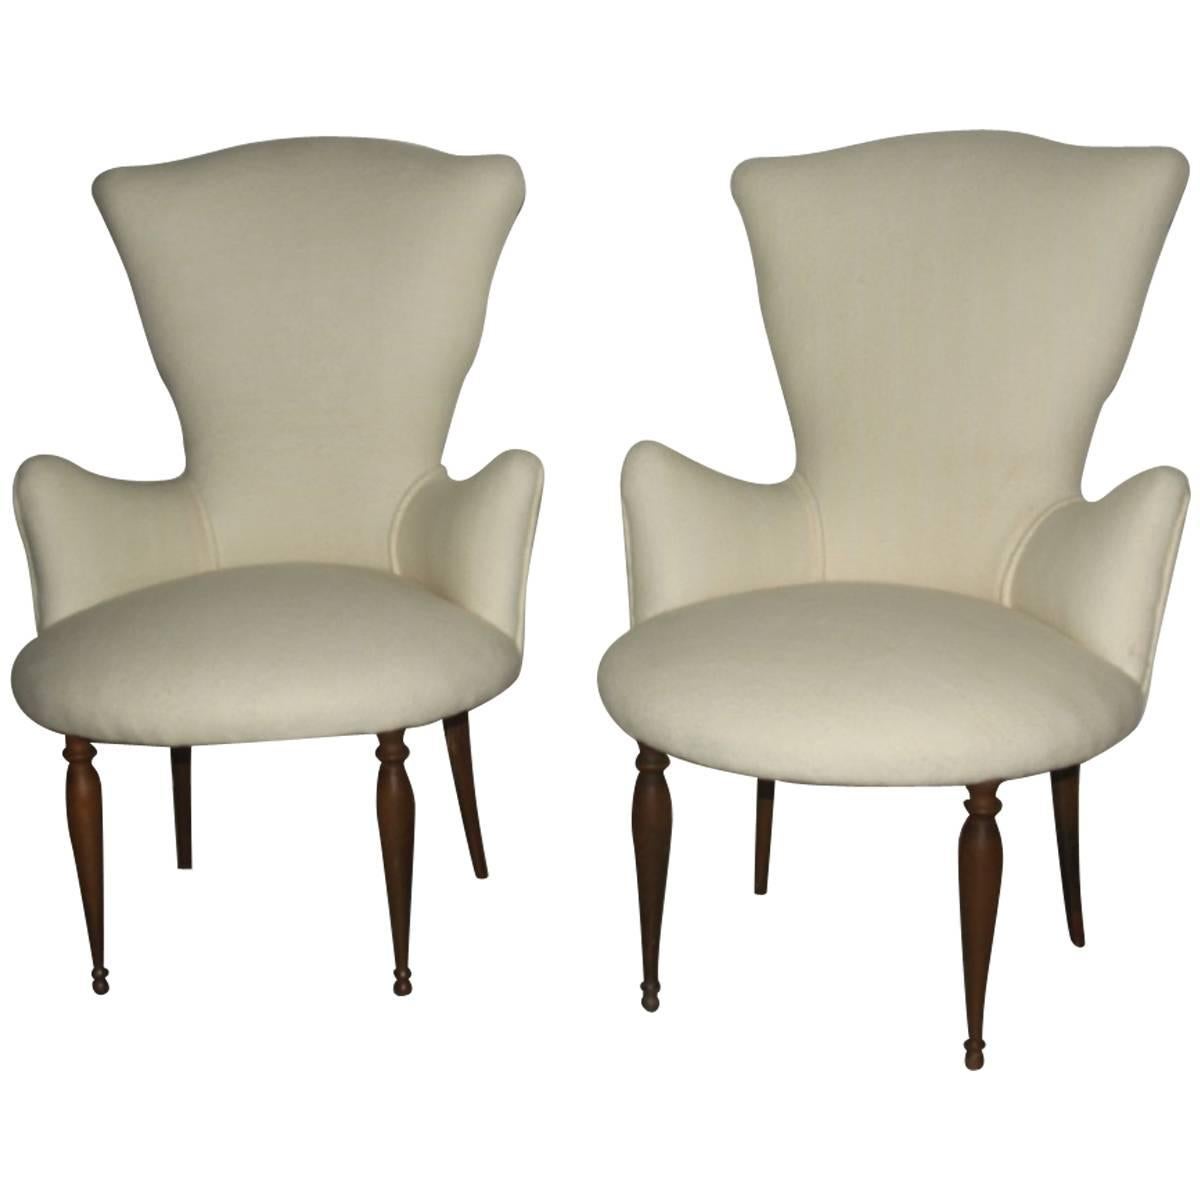 Pair of Small Armchairs of 1950s, Italian Design